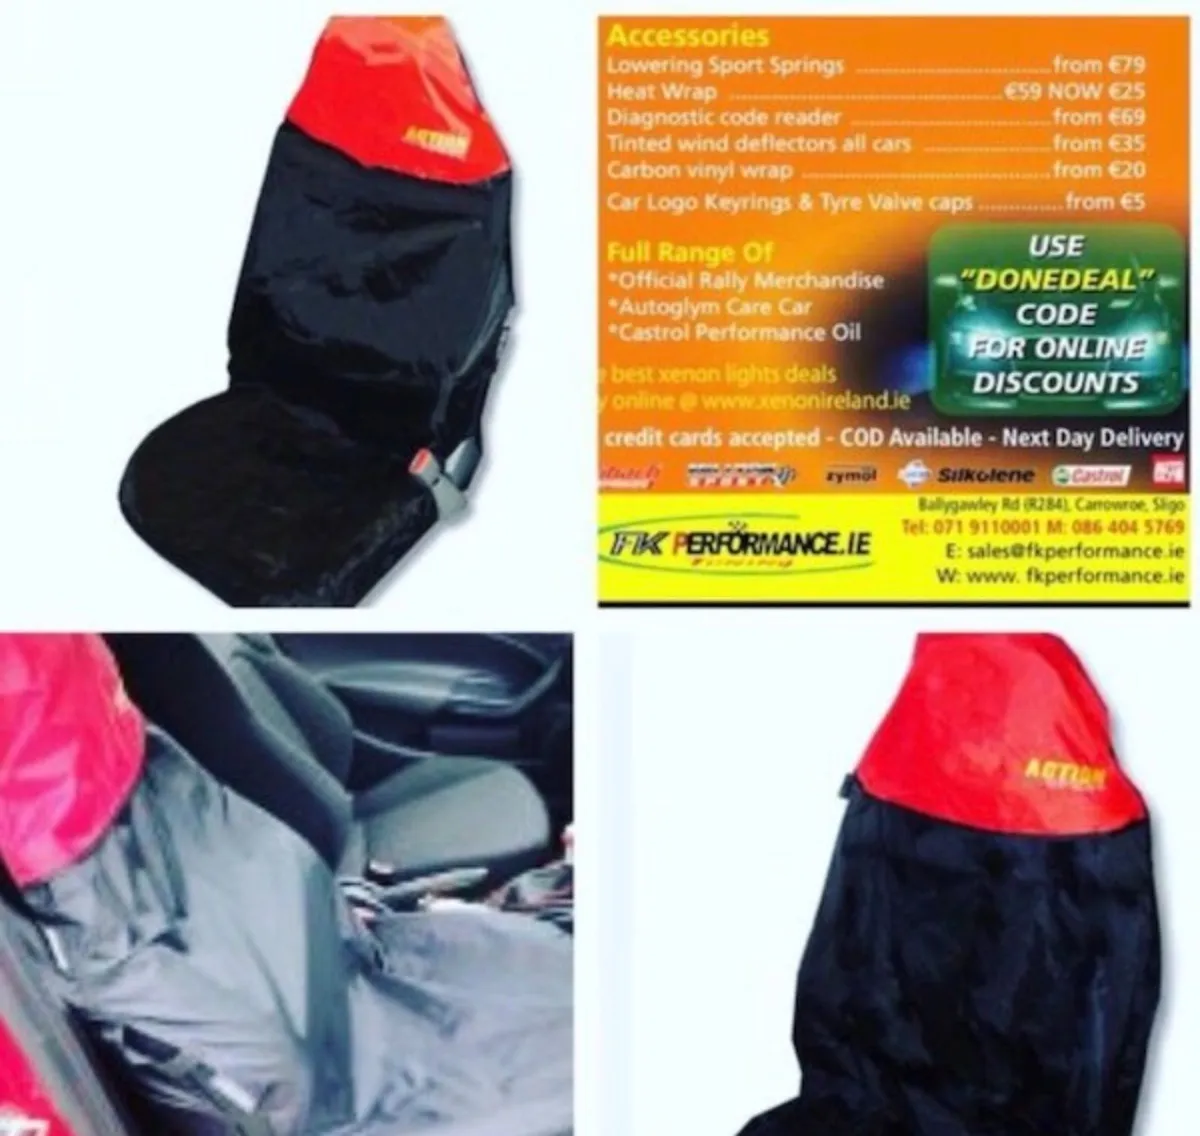 Action sport seat covers fk online shop offer - Image 1